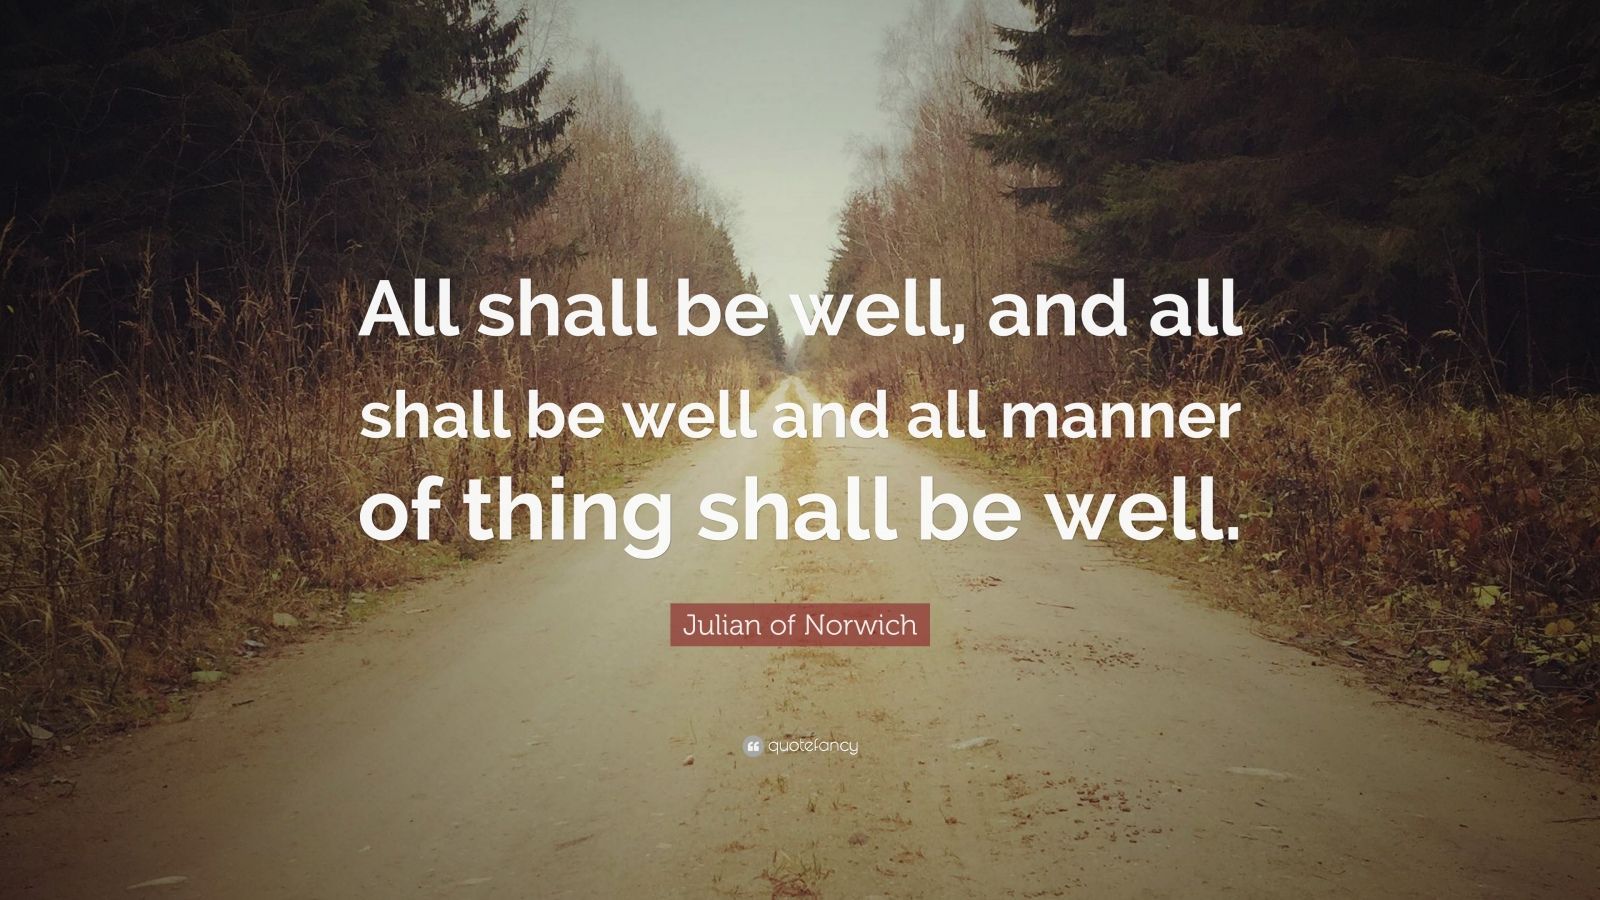 Julian of Norwich Quote: “All shall be well, and all shall be well